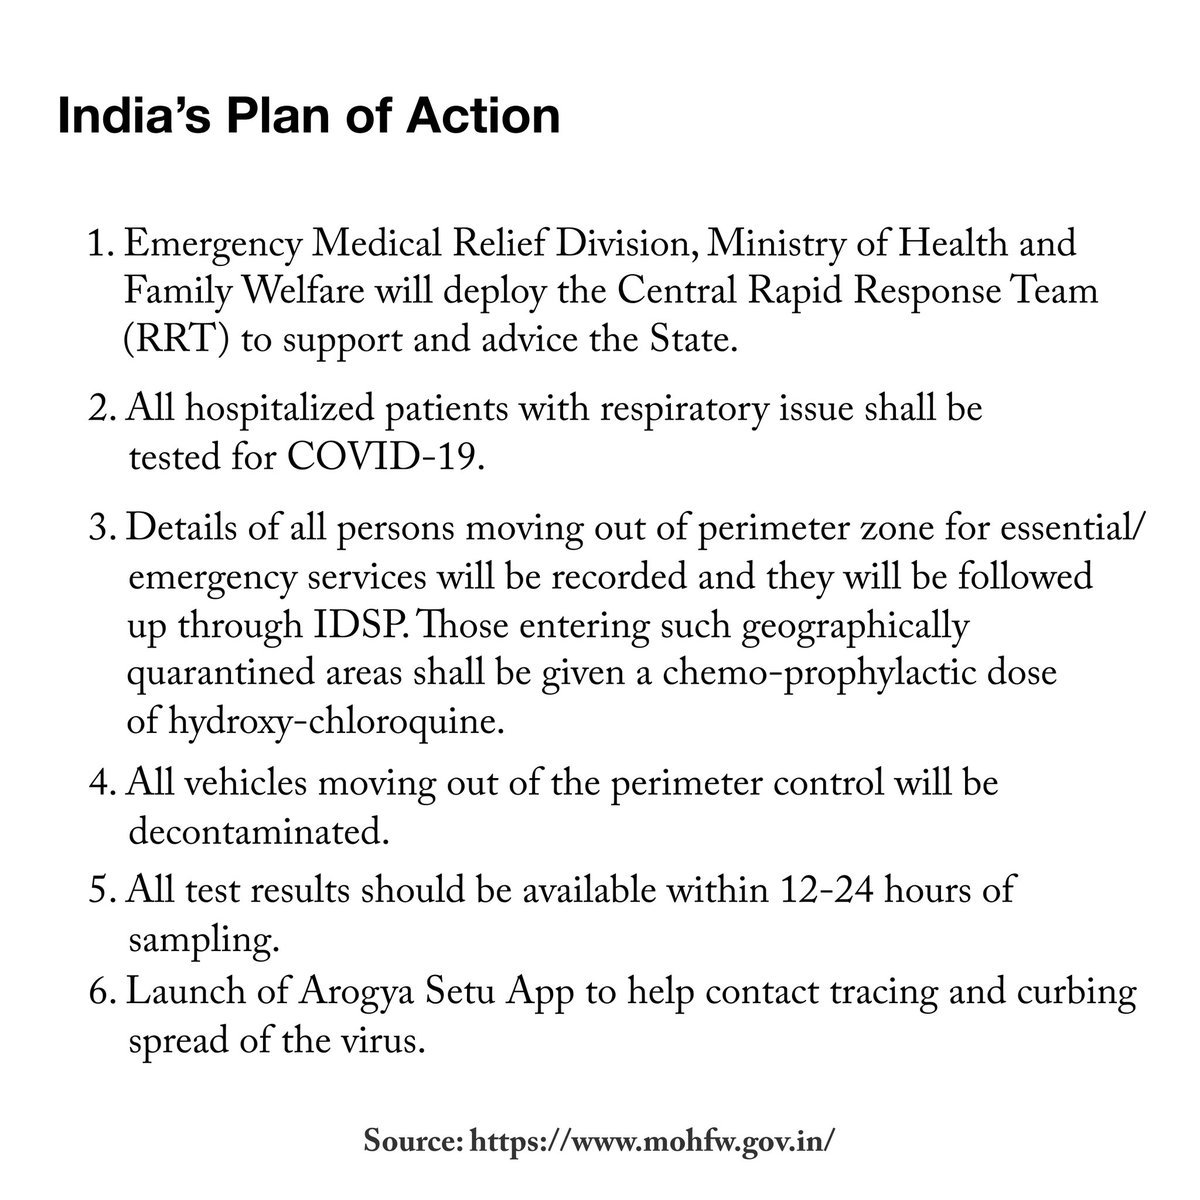 India's Plan of Action